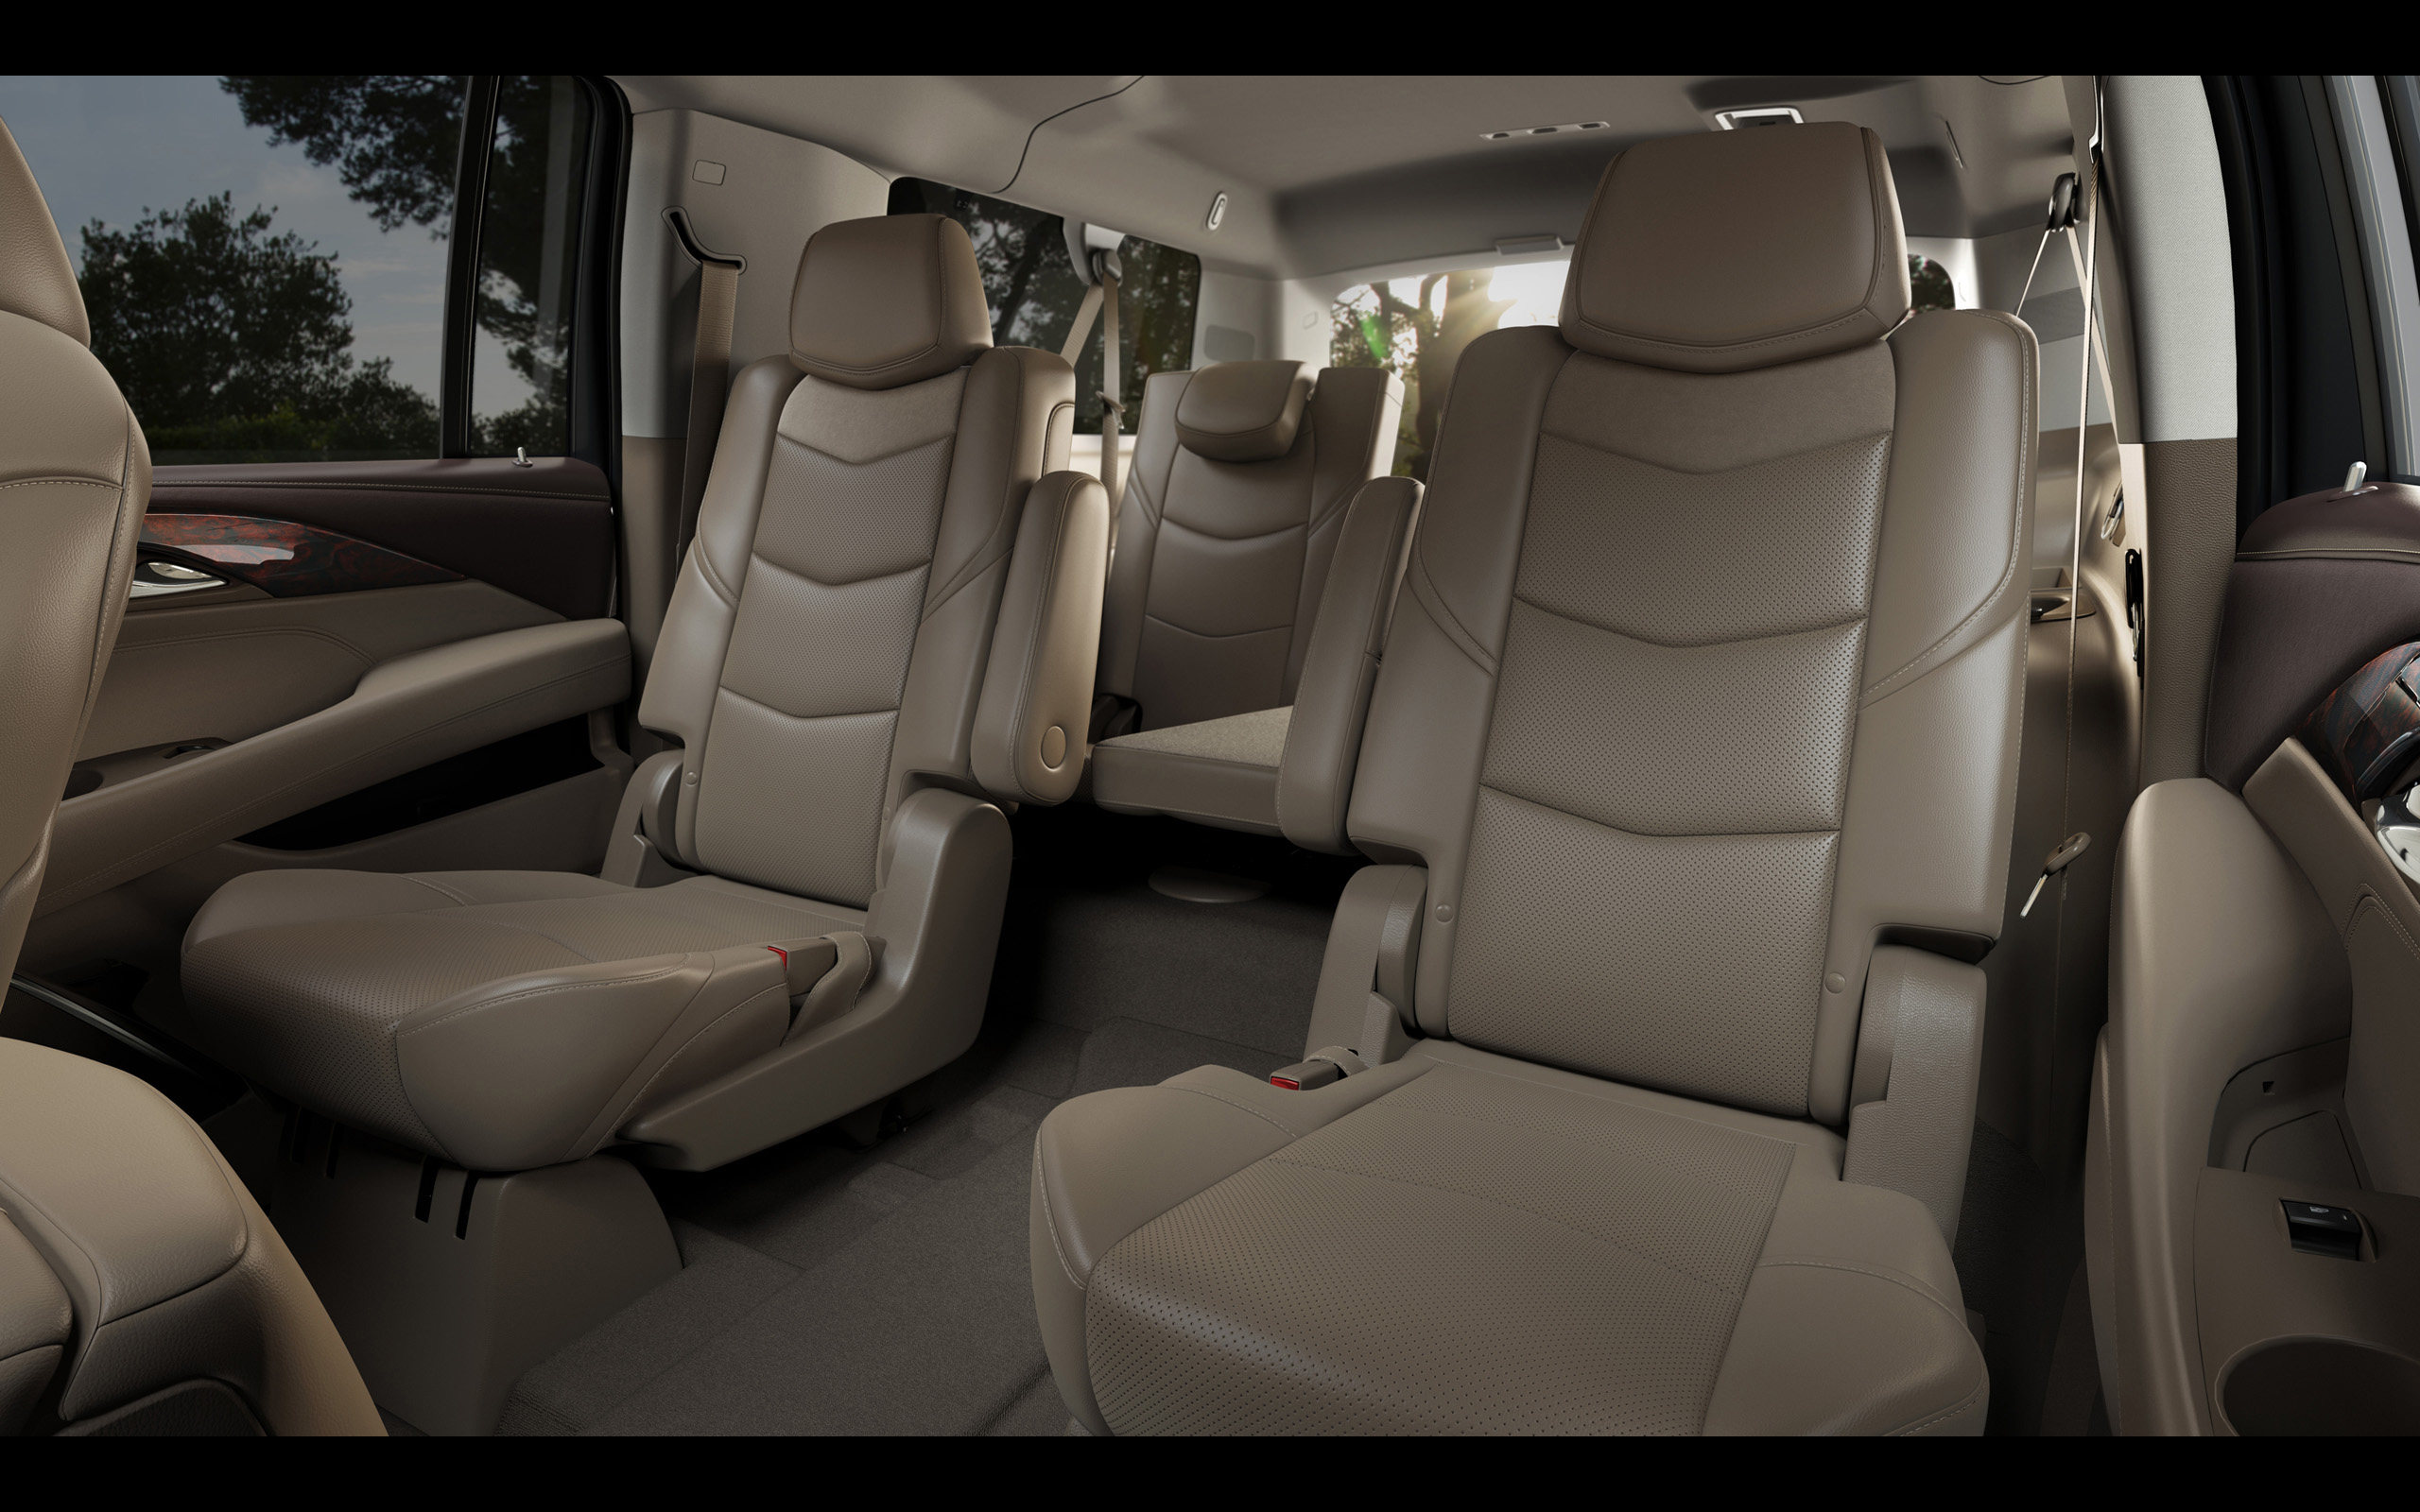 Escalade ESV seats were designed to be more comfortable and sculpted in appearance with a reclining second row. The design incorporates dual-firmness foam that ensures long-trip comfort and helps retain appearance over time.